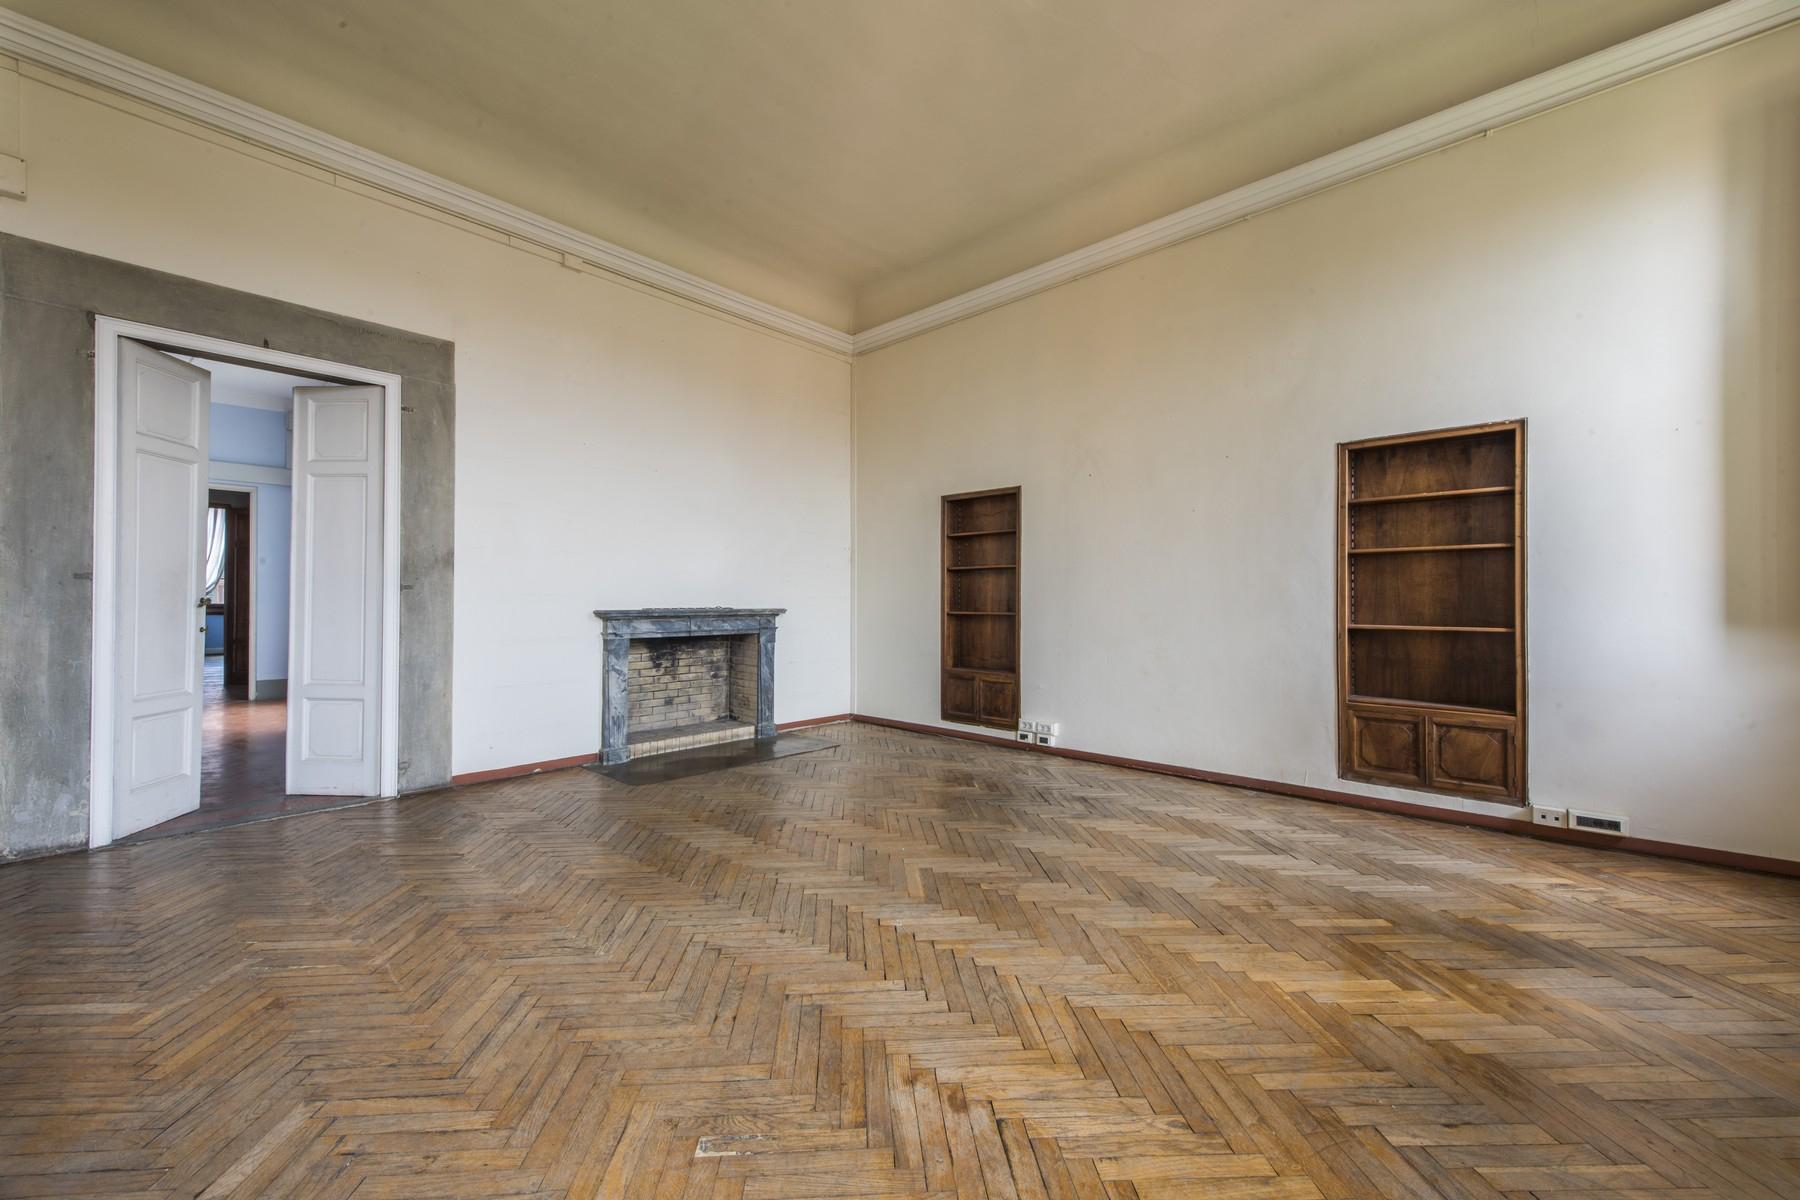 Magnificent 520sqm penthouse in a historic Florentine palazzo. - 9